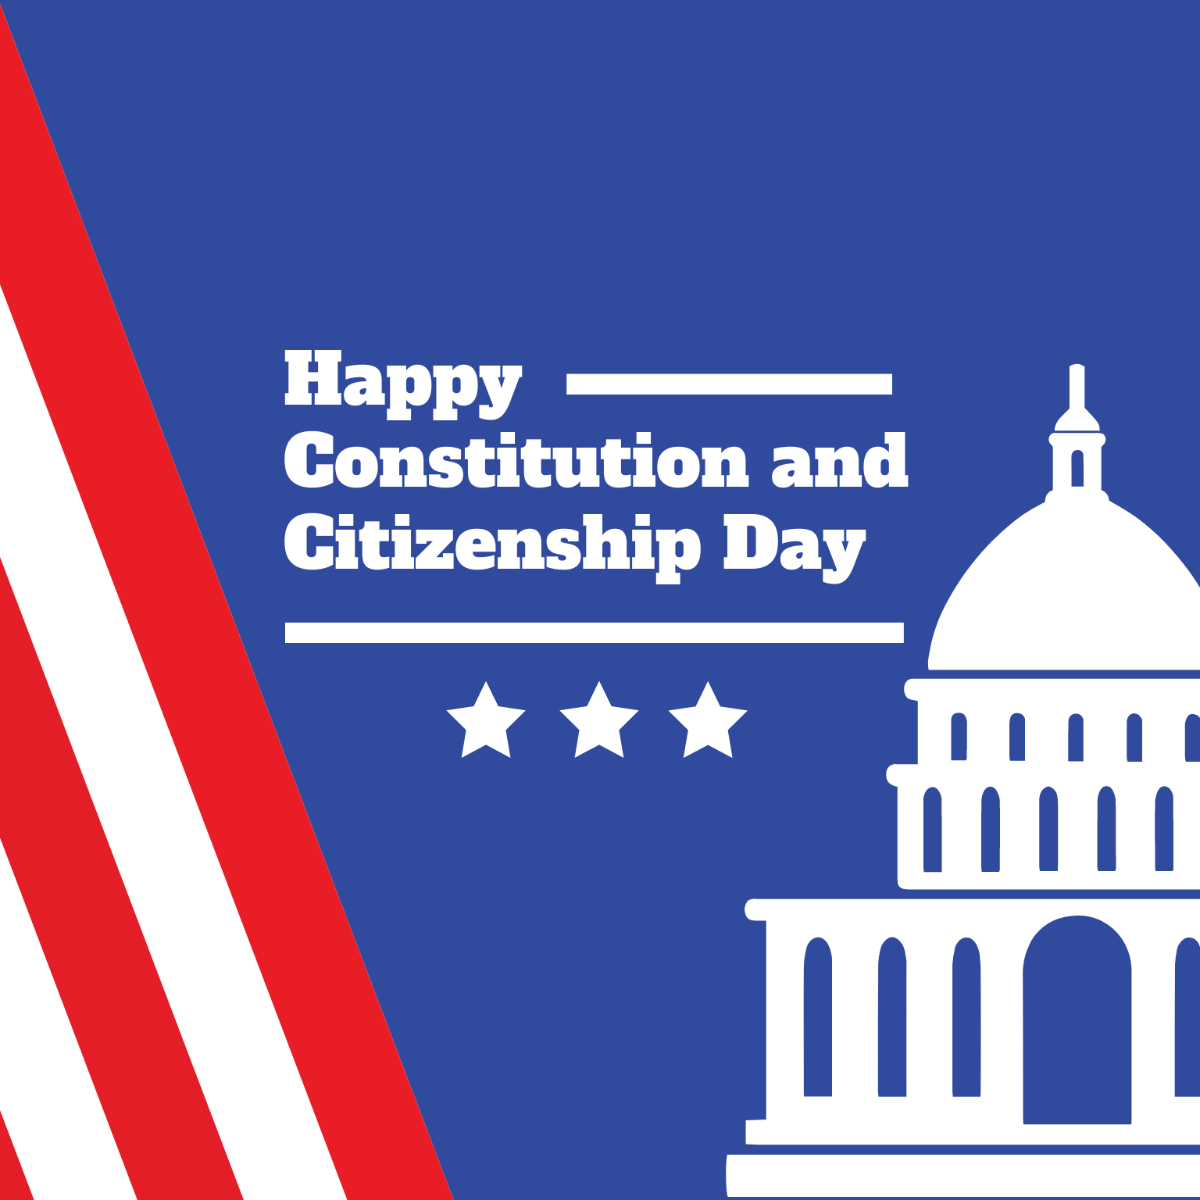 Free Happy Constitution and Citizenship Day Illustration Template